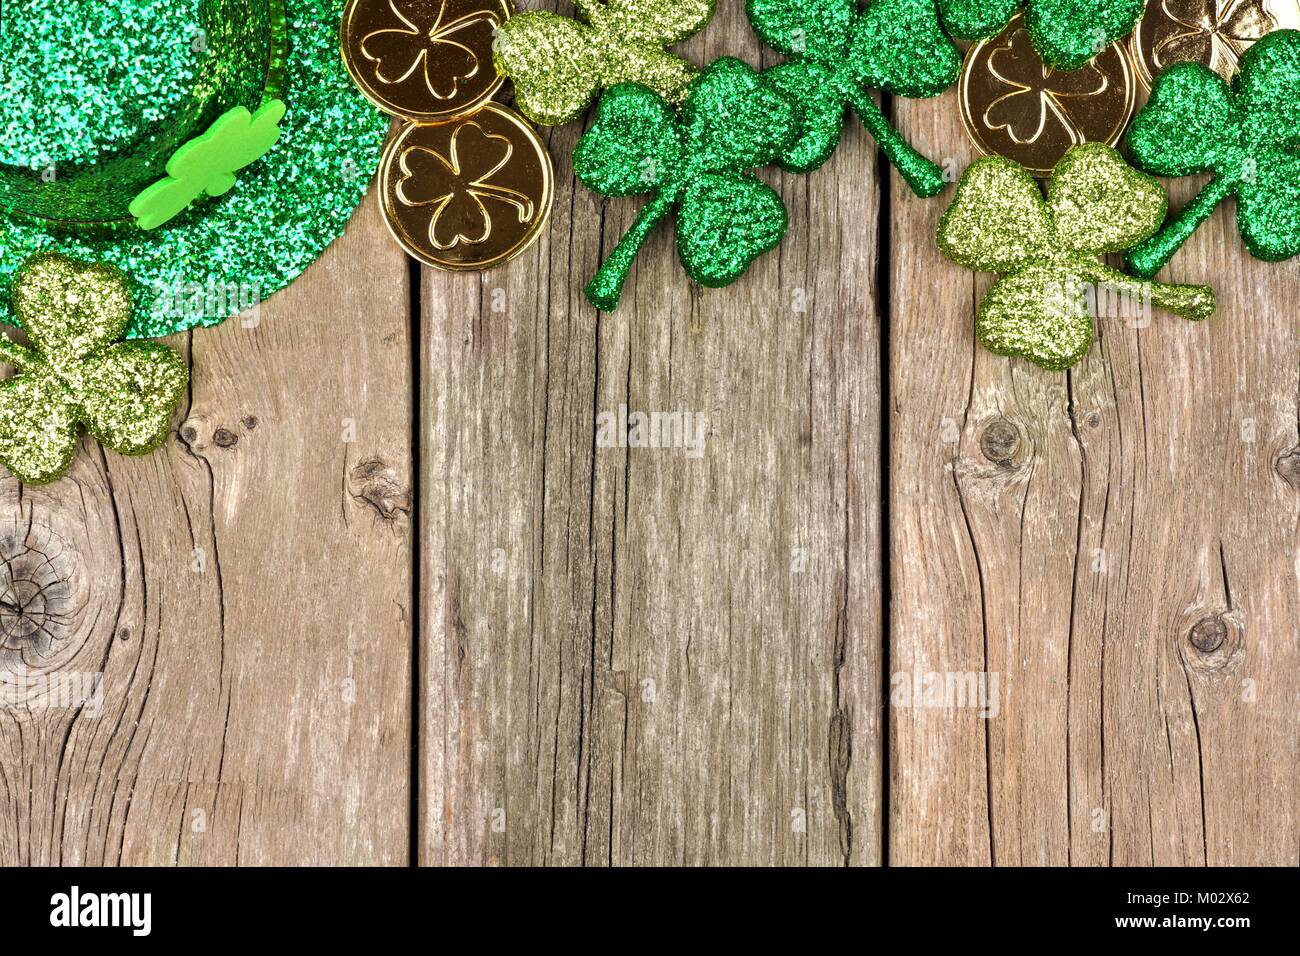 St Patricks Day top border of shamrocks, gold coins and leprechaun hat over rustic wood Stock Photo